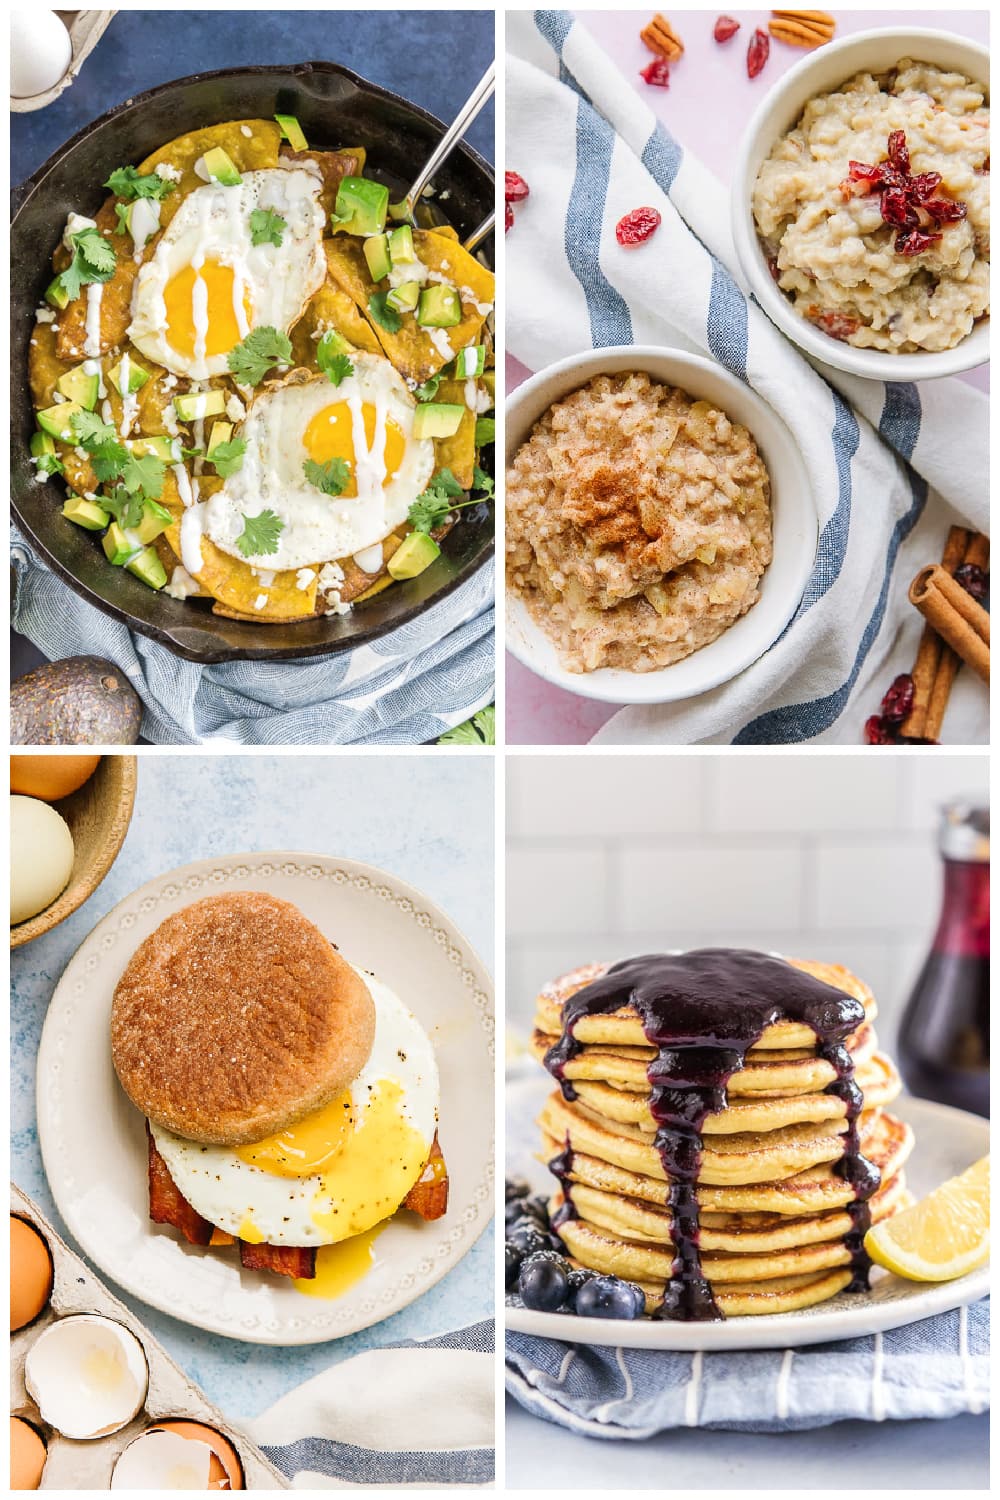 Meal Prep Breakfasts, Car-Friendly Snacks & Whether or Not My